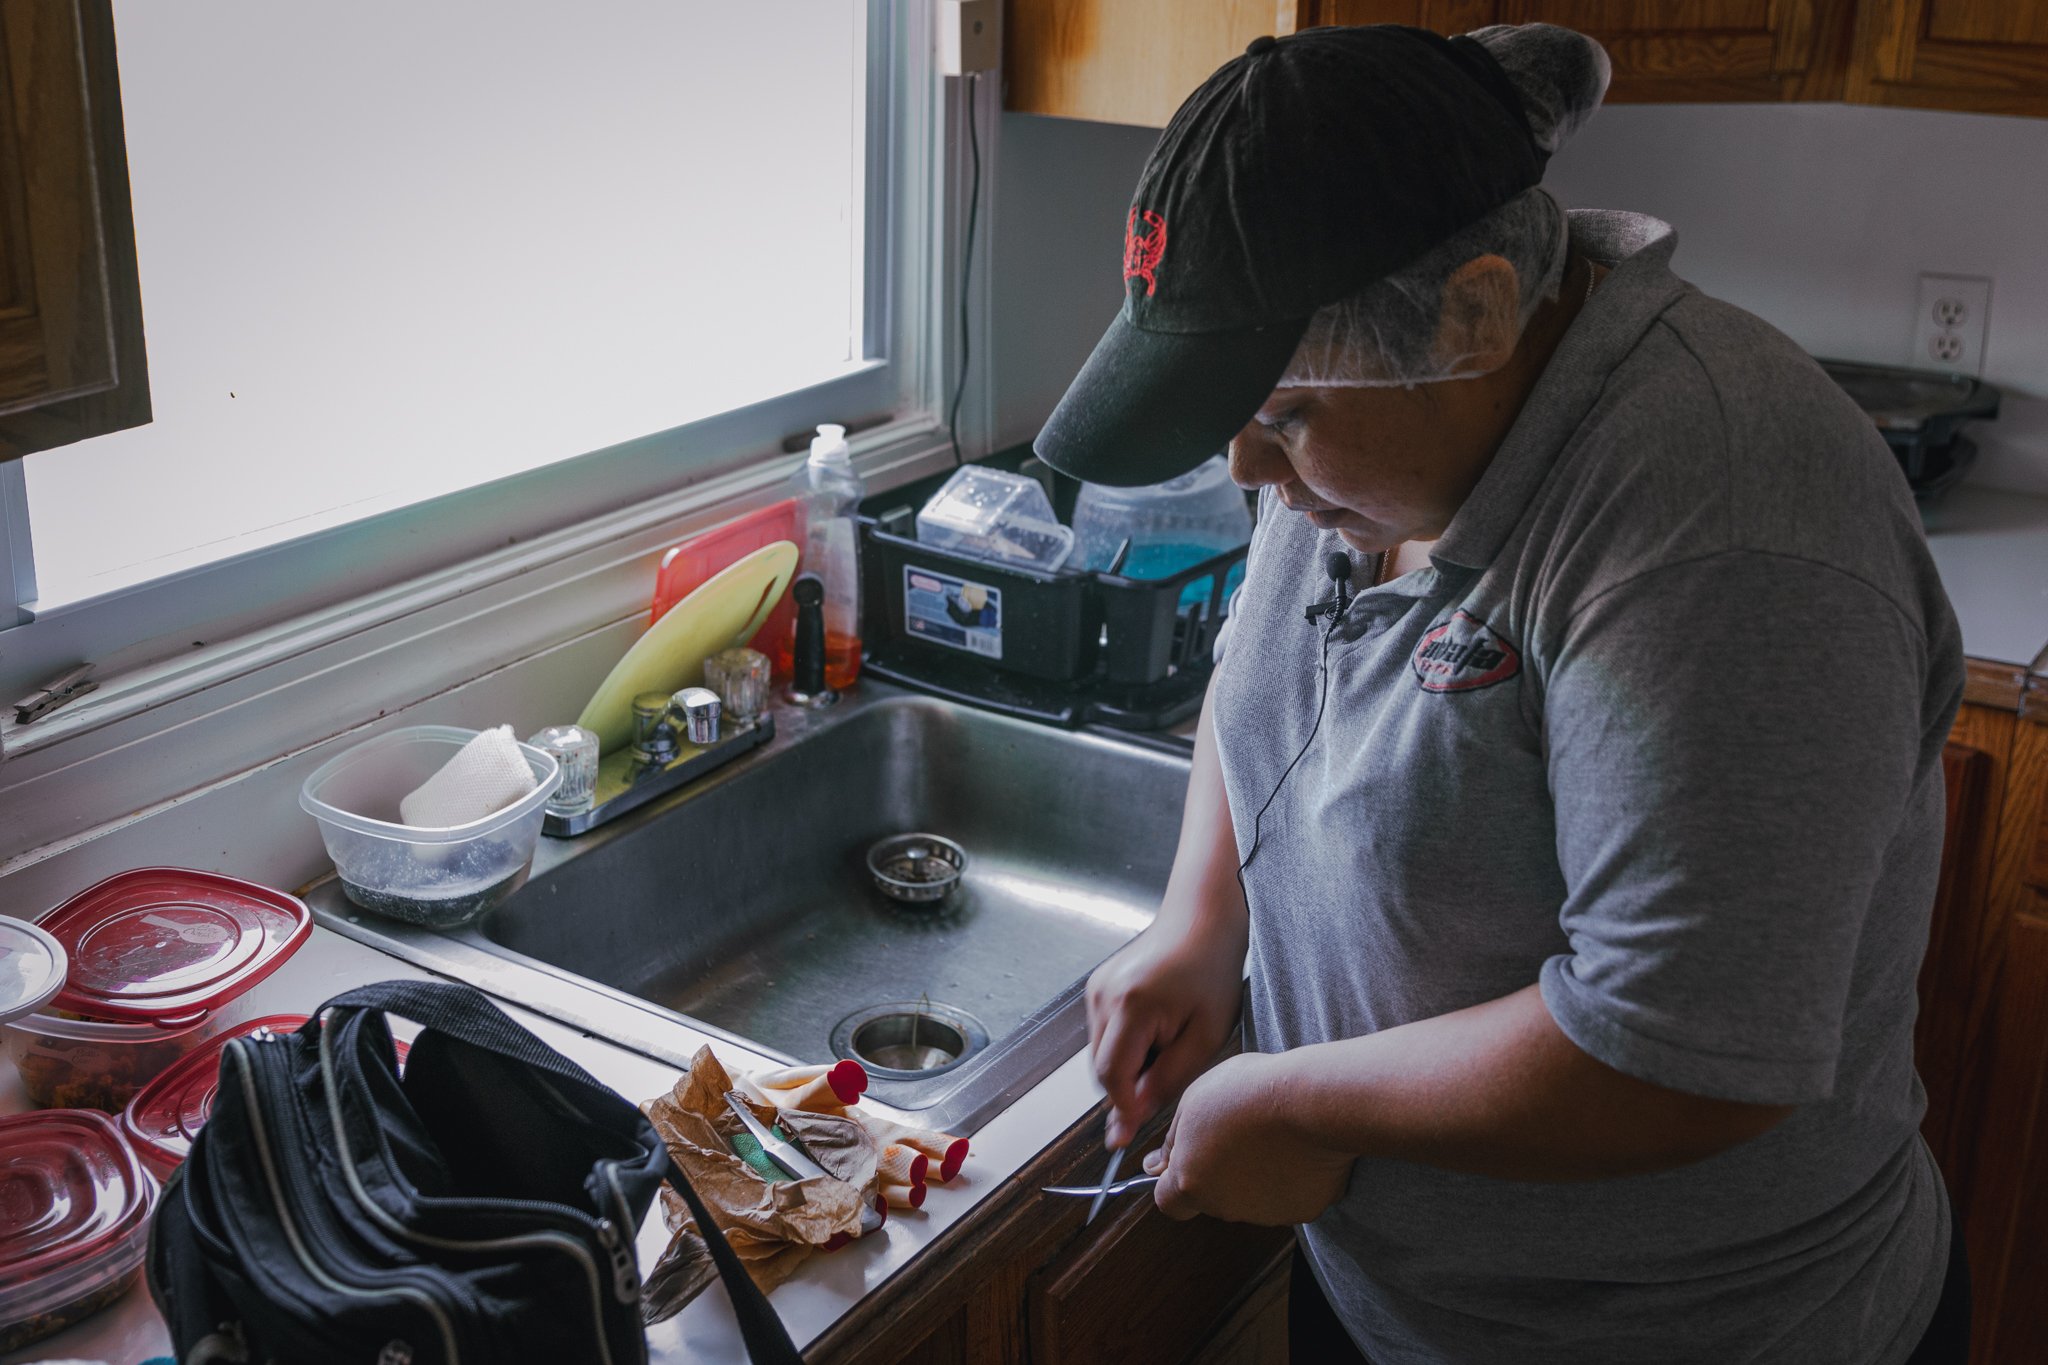  Melva Guadalupe Vázquez, 28, of Ciudad del Maíz, in San Luis Potosí, Mexico packs a lunch, a pair of gloves and sharpens two small crab picking knives before another shift at Lindys Seafood. “I do not accept or agree with the ideals of the presid